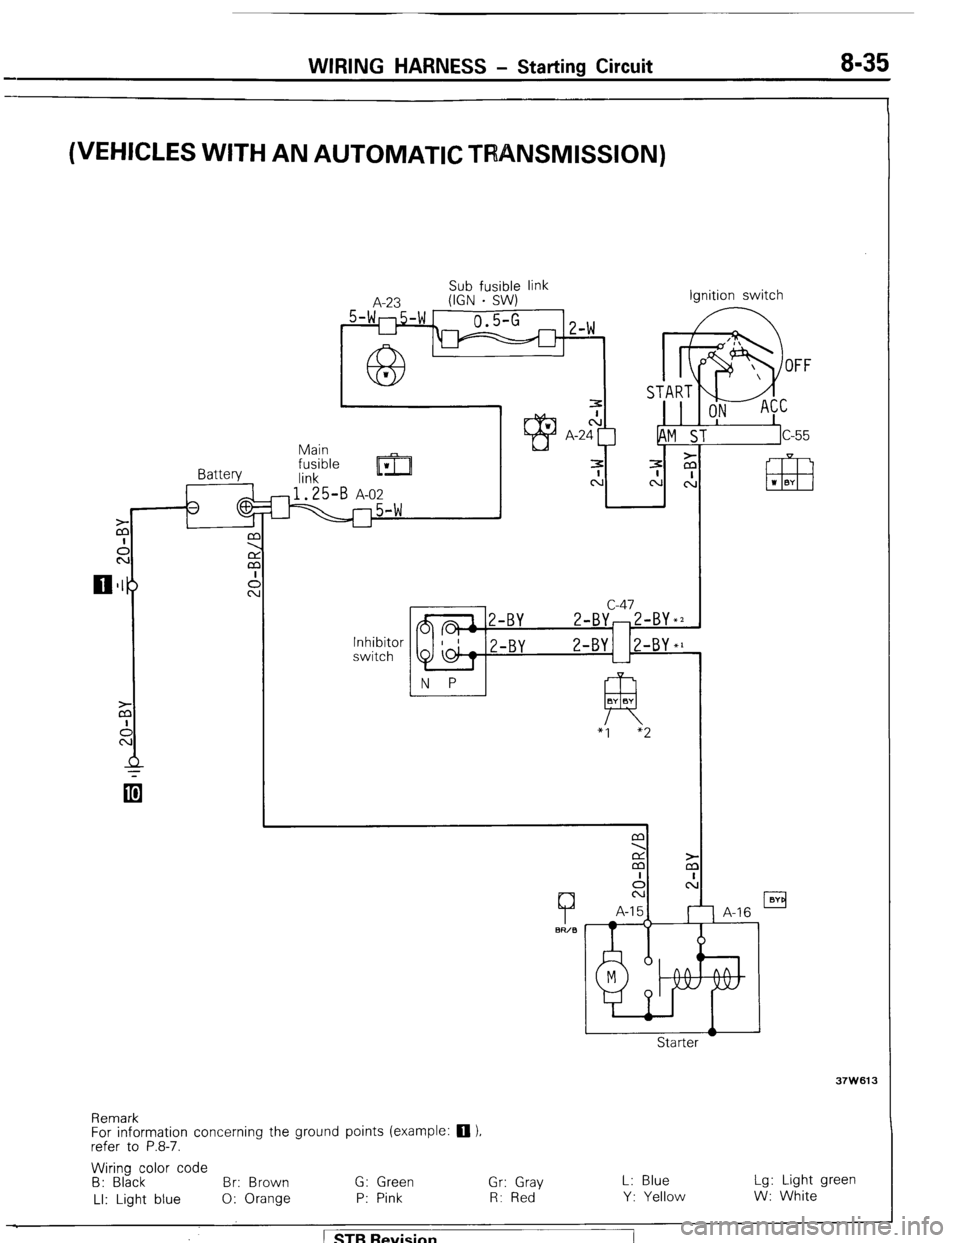 MITSUBISHI MONTERO 1987 1.G Workshop Manual WIRING HARNESS - Starting Circuit 8-35 
(VEHICLES WITH AN AUTOMATIC TRANSMISSION) 
Battery 
-p Main 
fusible 
lrril ‘I 
link 
1.25-B A-02 
-5-w 
A-23 Sub fusible link 
(IGN . SW) Ignition switch 
U 